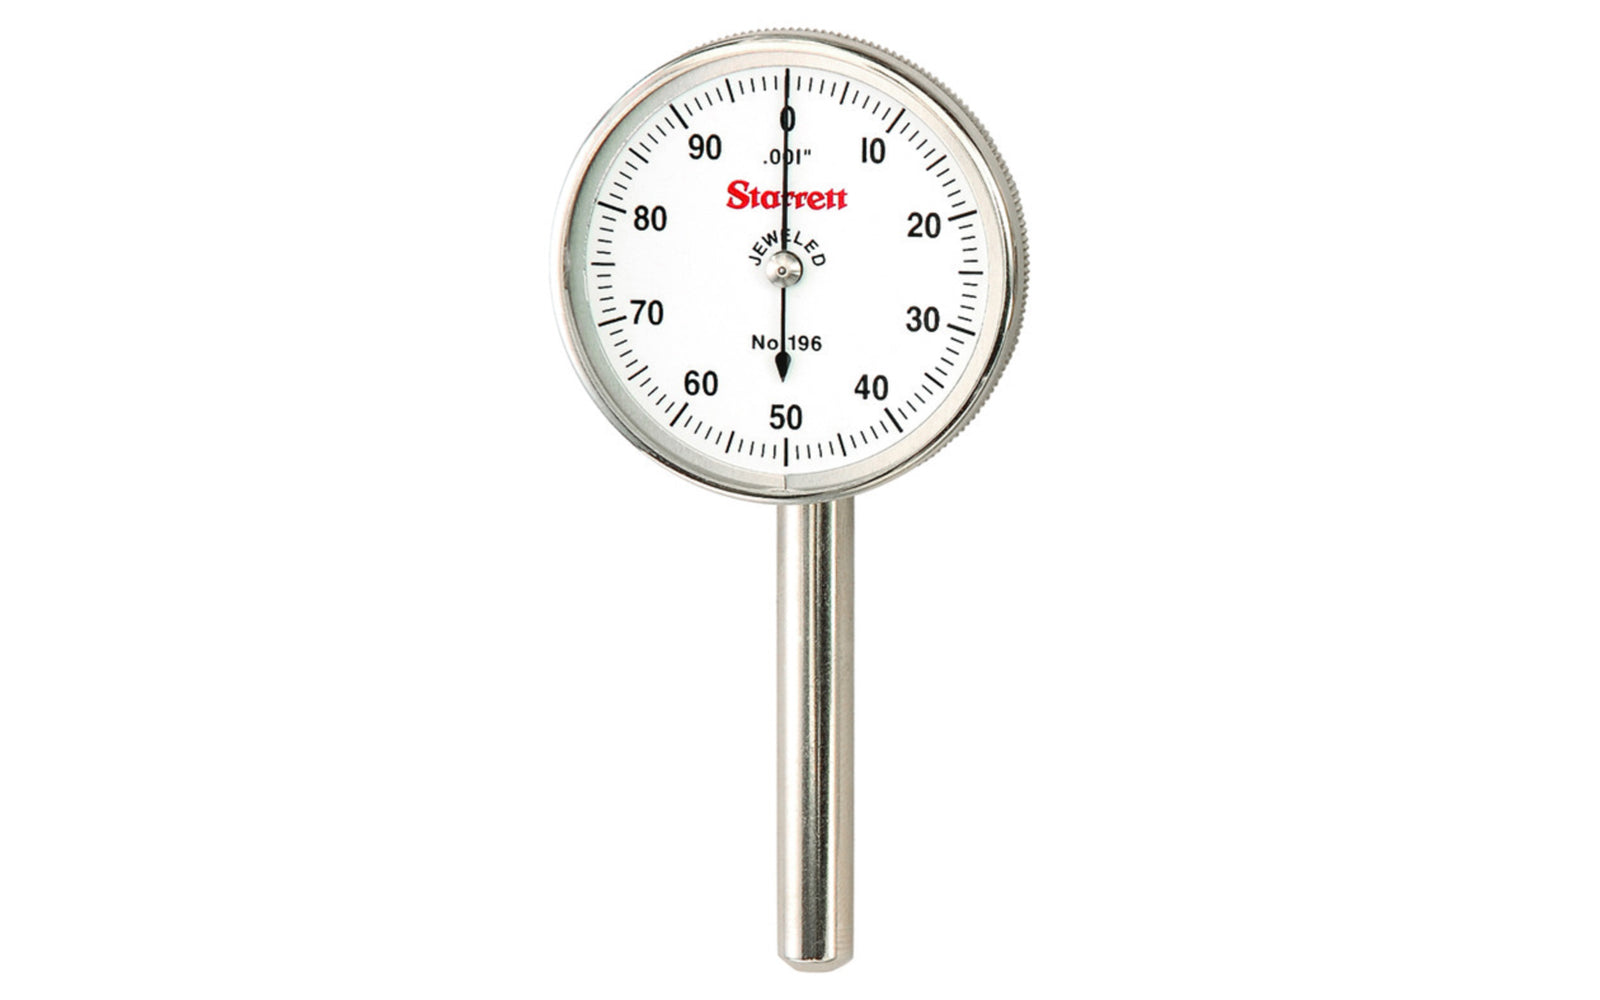 Starrett Universal Back Plunger Dial Indicator - 196B1. 0.200" Range, 0-100 Dial Face, .001" Graduations. 50699. Made in USA.